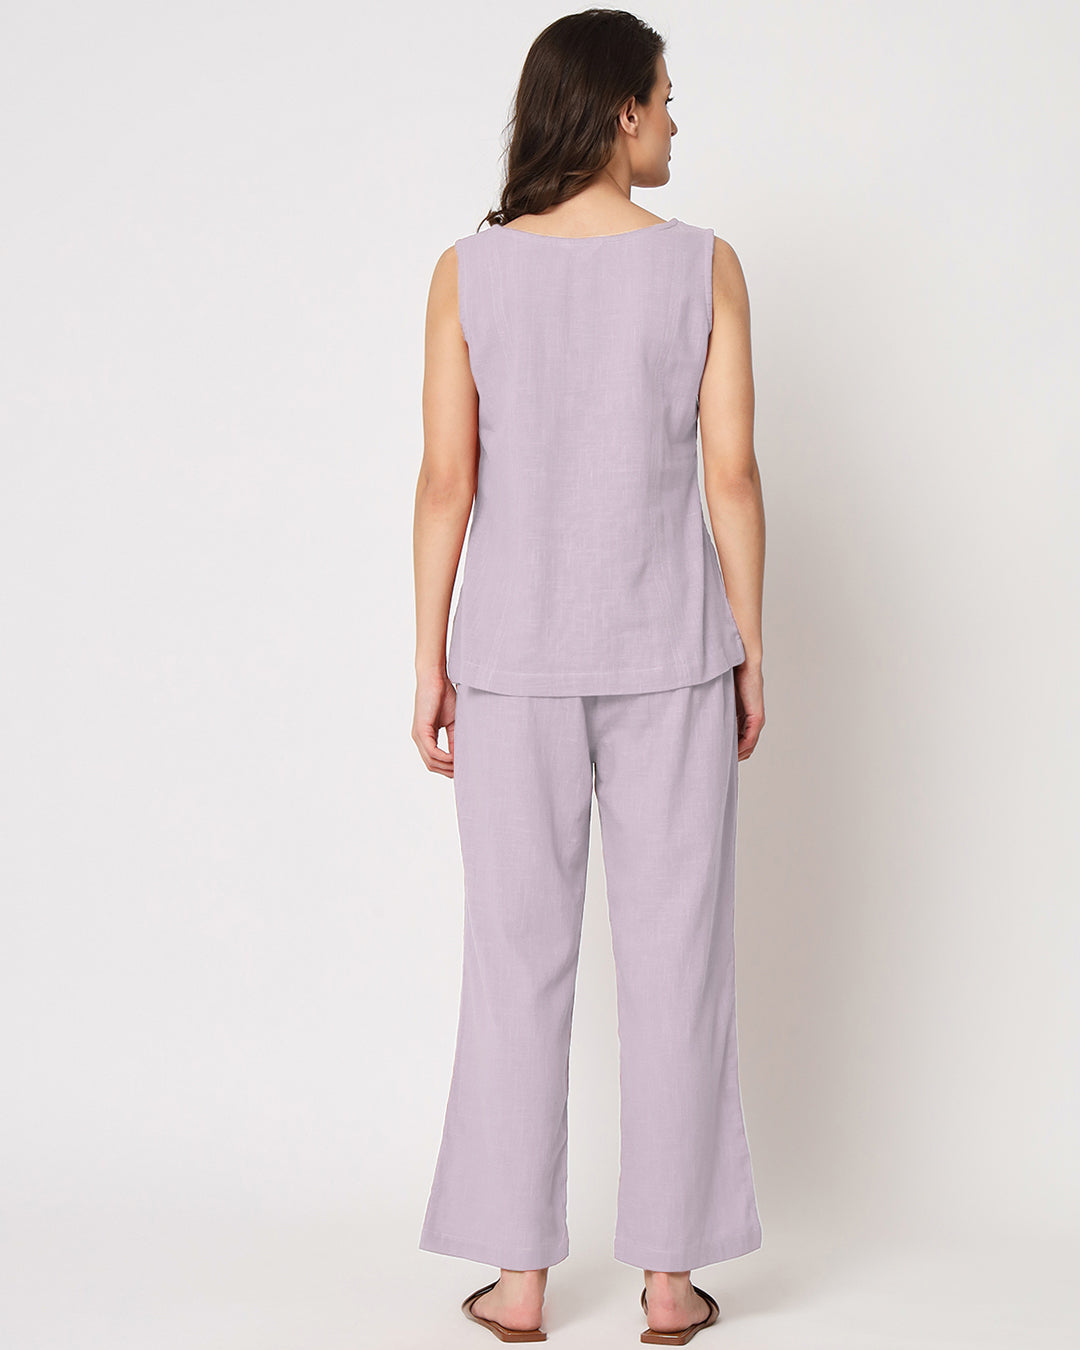 Lilac Sleeveless Short Length Solid Top (Without Bottoms)